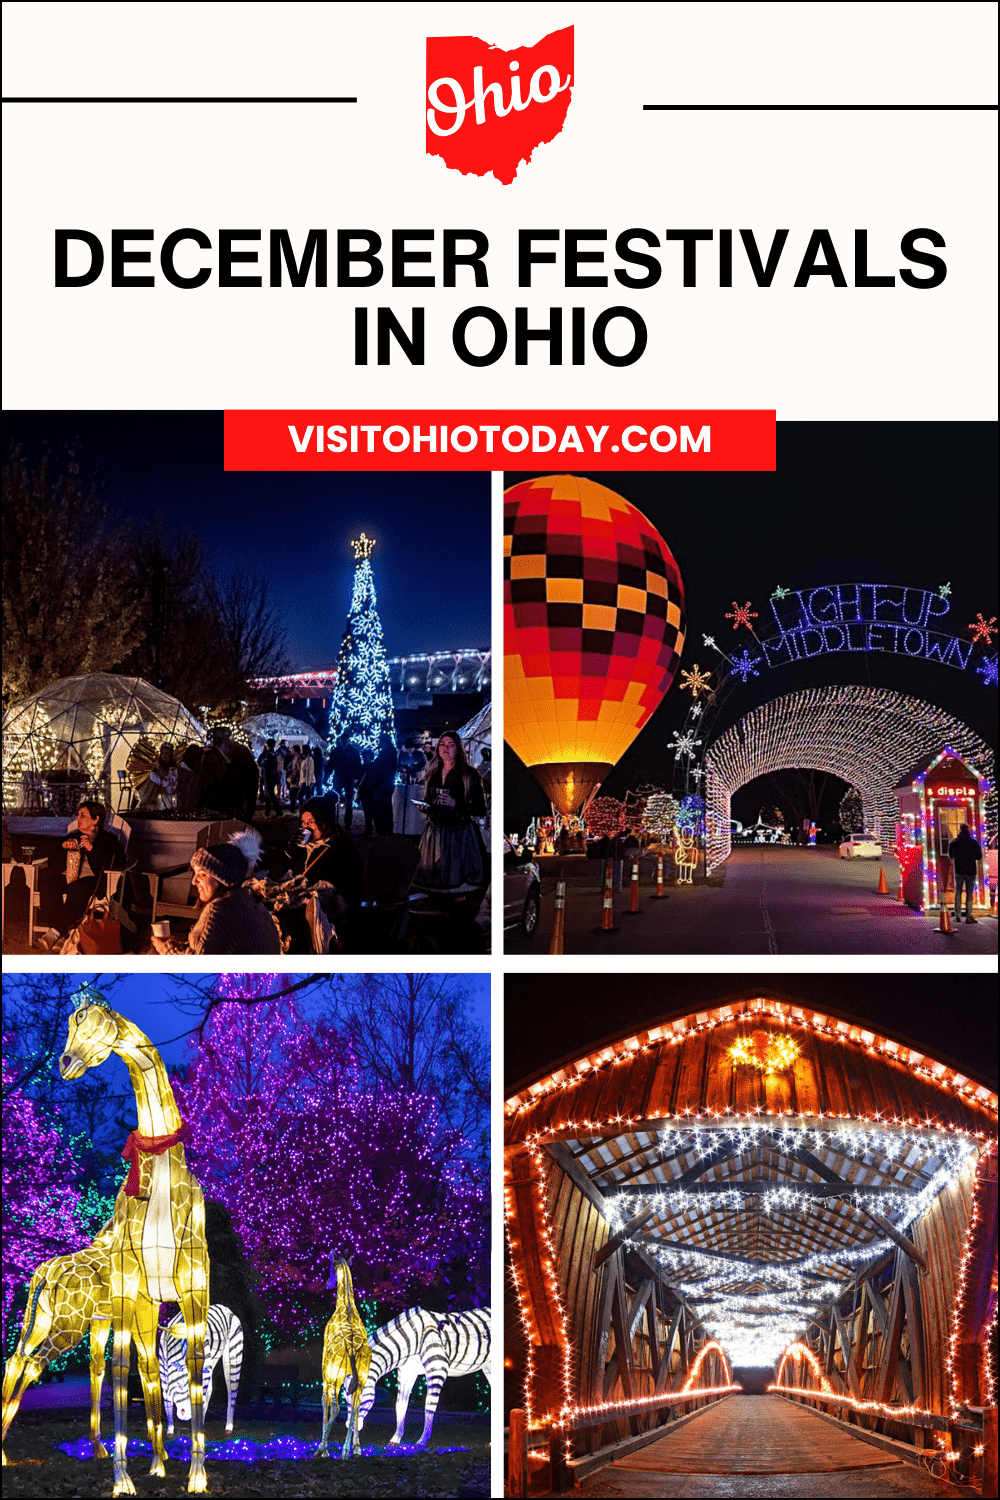 A vertical image for Pinterest of 4 photos of festivals occurring in December in Ohio. The pictures depict four different holiday lights festivals. A white block at the top has text December Festivals in Ohio. A red block underneath has text VisitOhioToday.com